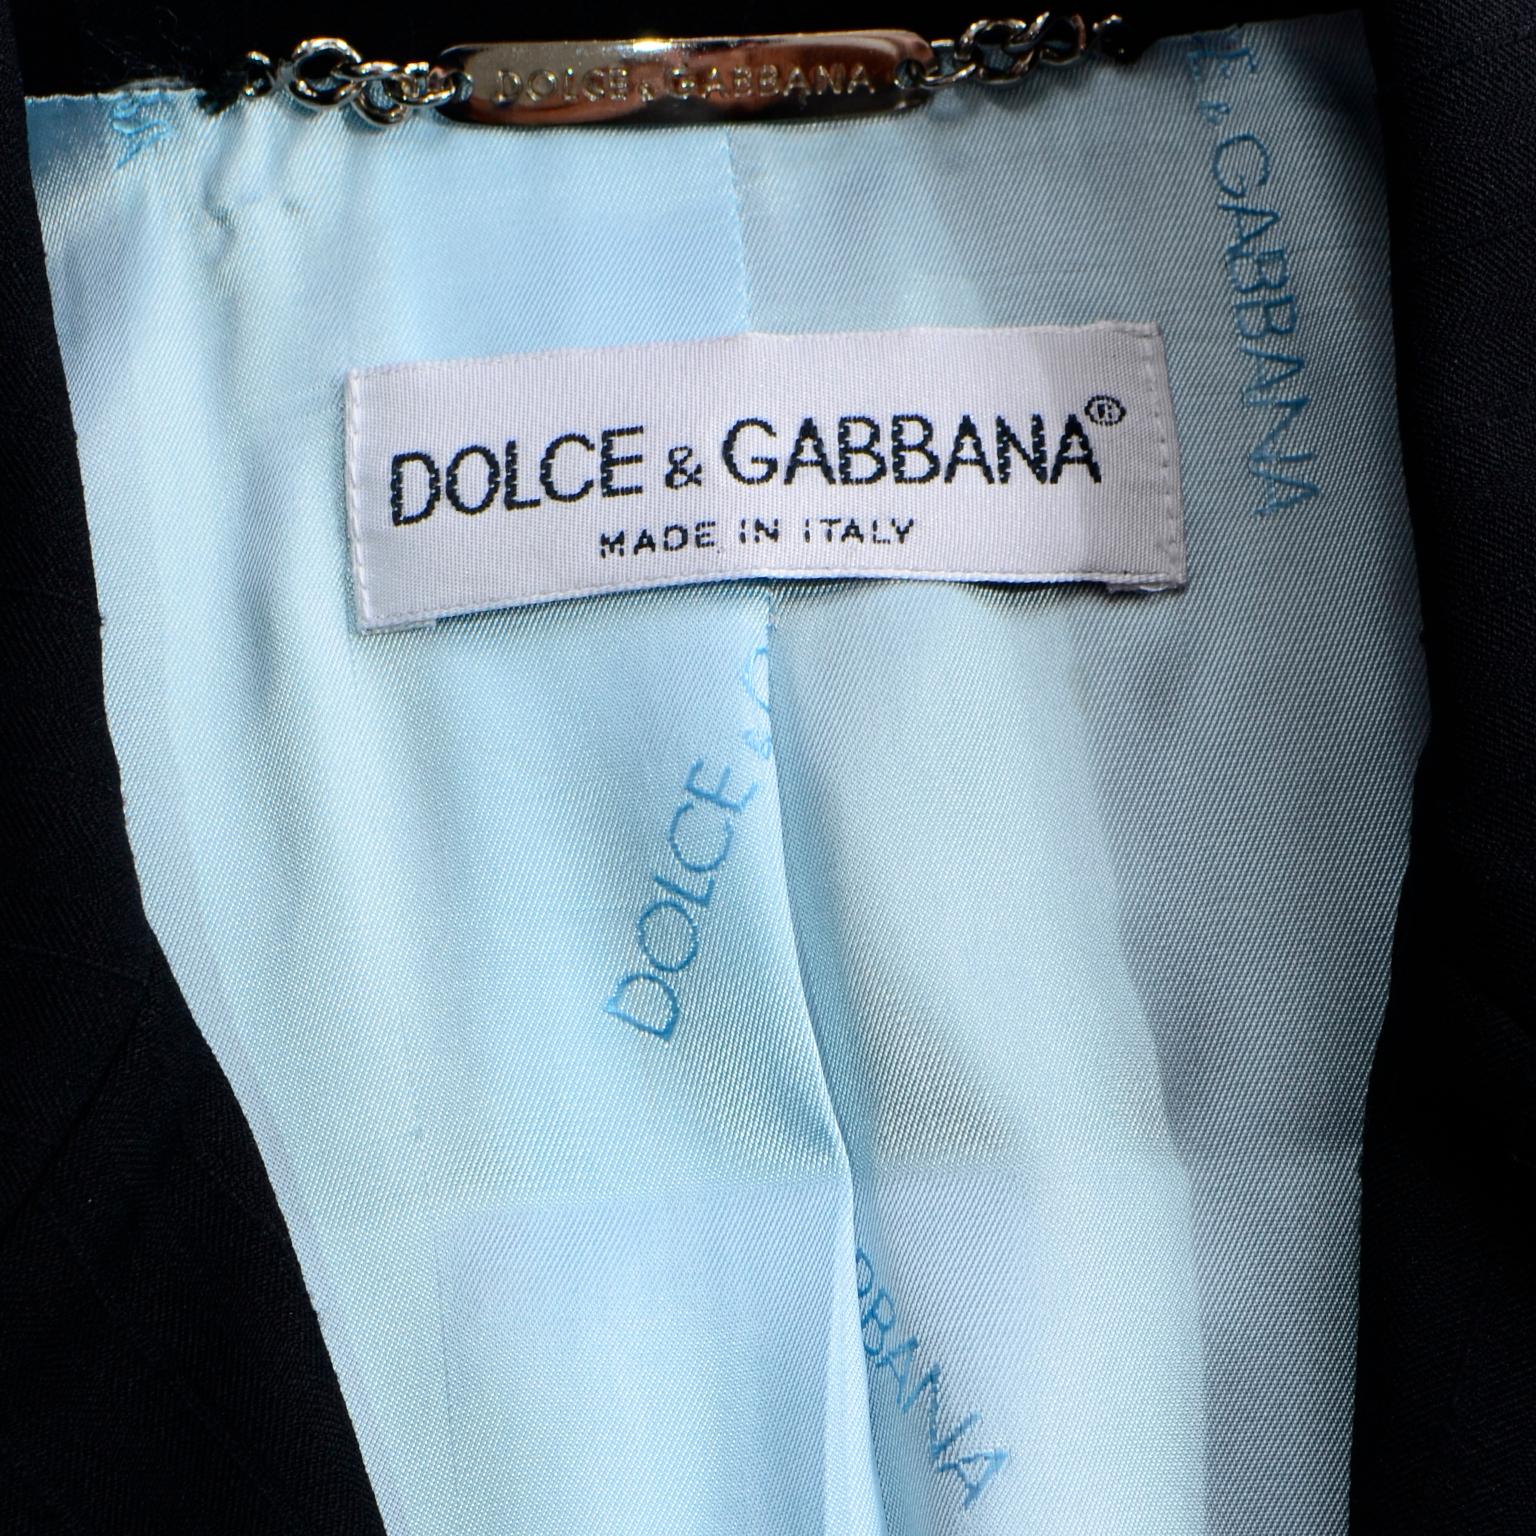 Vintage Dolce Gabbana Black Double Breasted Jacket and Skirt Suit For Sale 6